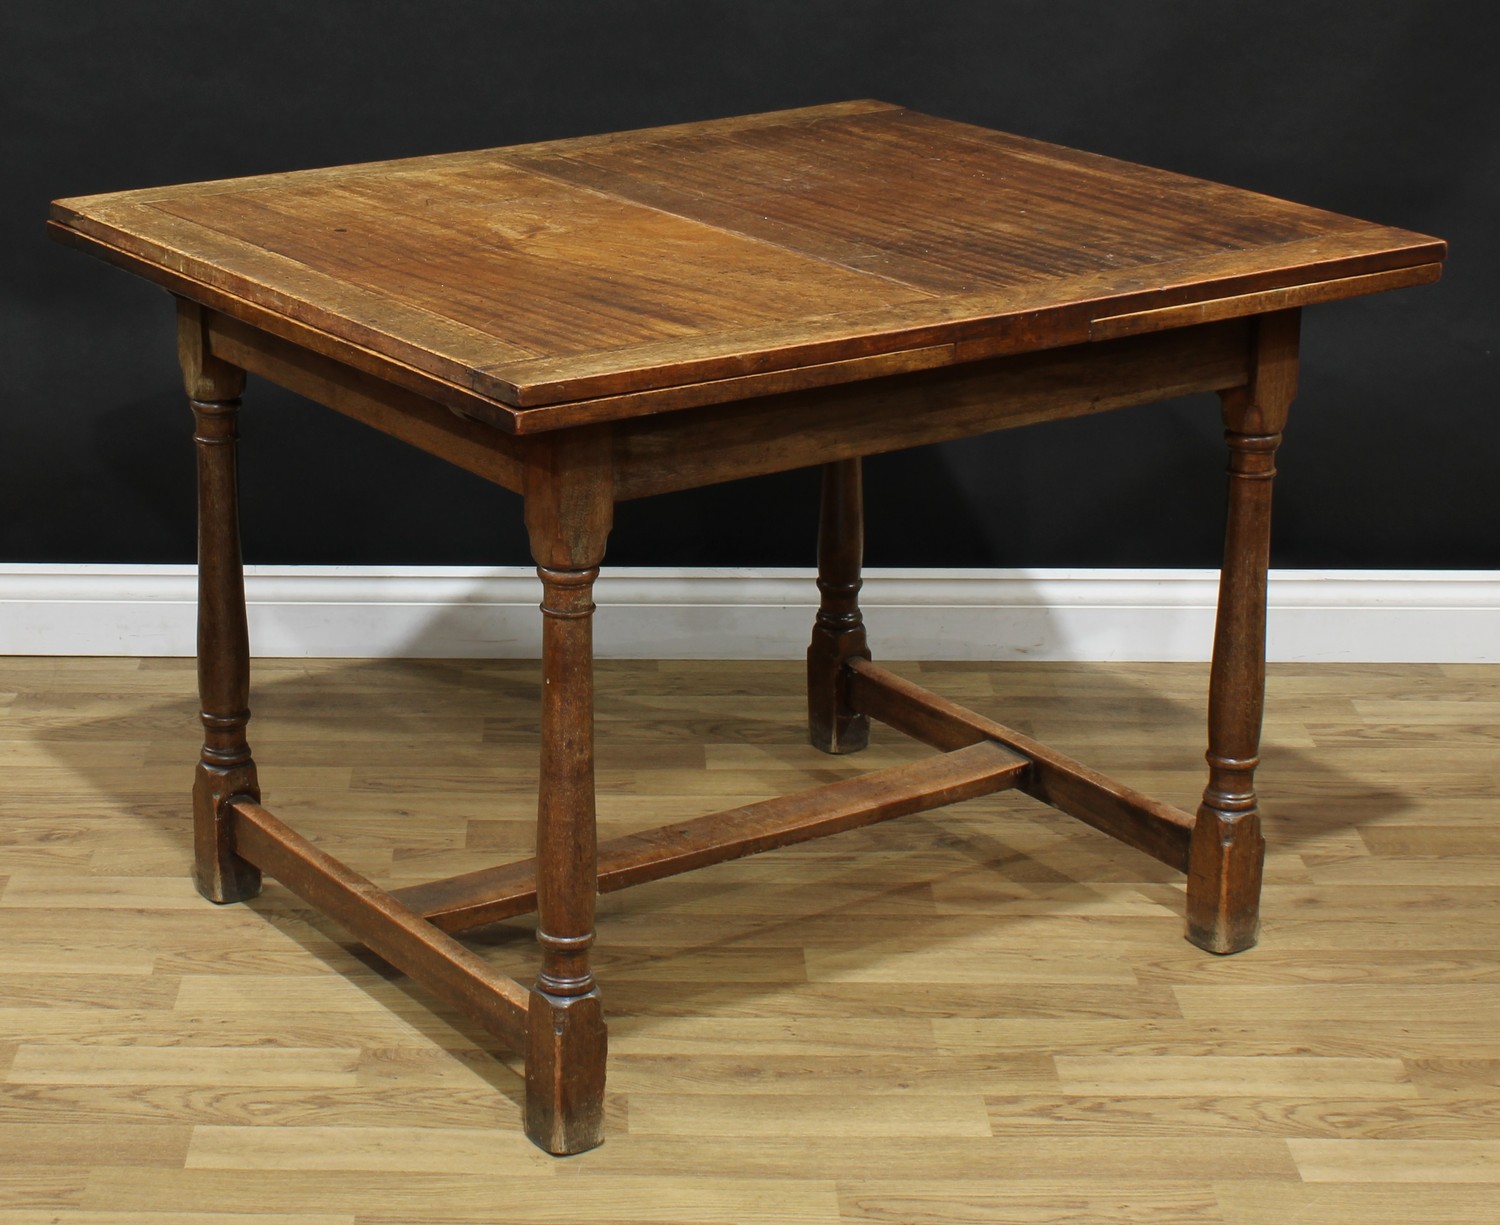 An early 20th century mahogany draw-leaf dining table, 75cm high (open), 106.5cm opening to 197. - Image 3 of 3